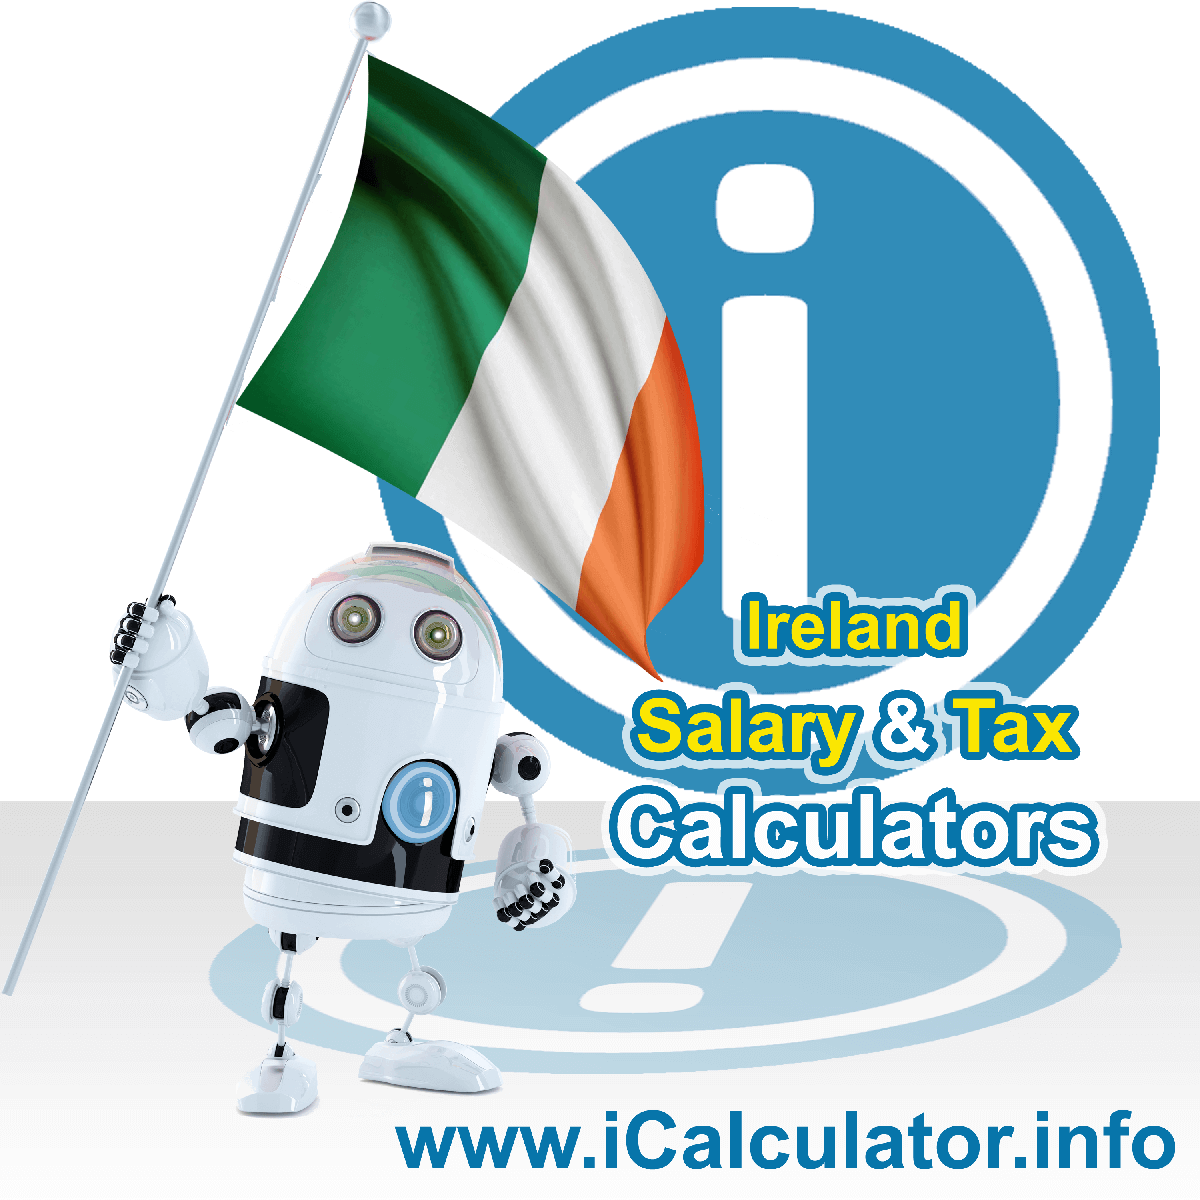 Ireland Tax Calculator. This image shows the Ireland flag and information relating to the tax formula for the Ireland Salary Calculator